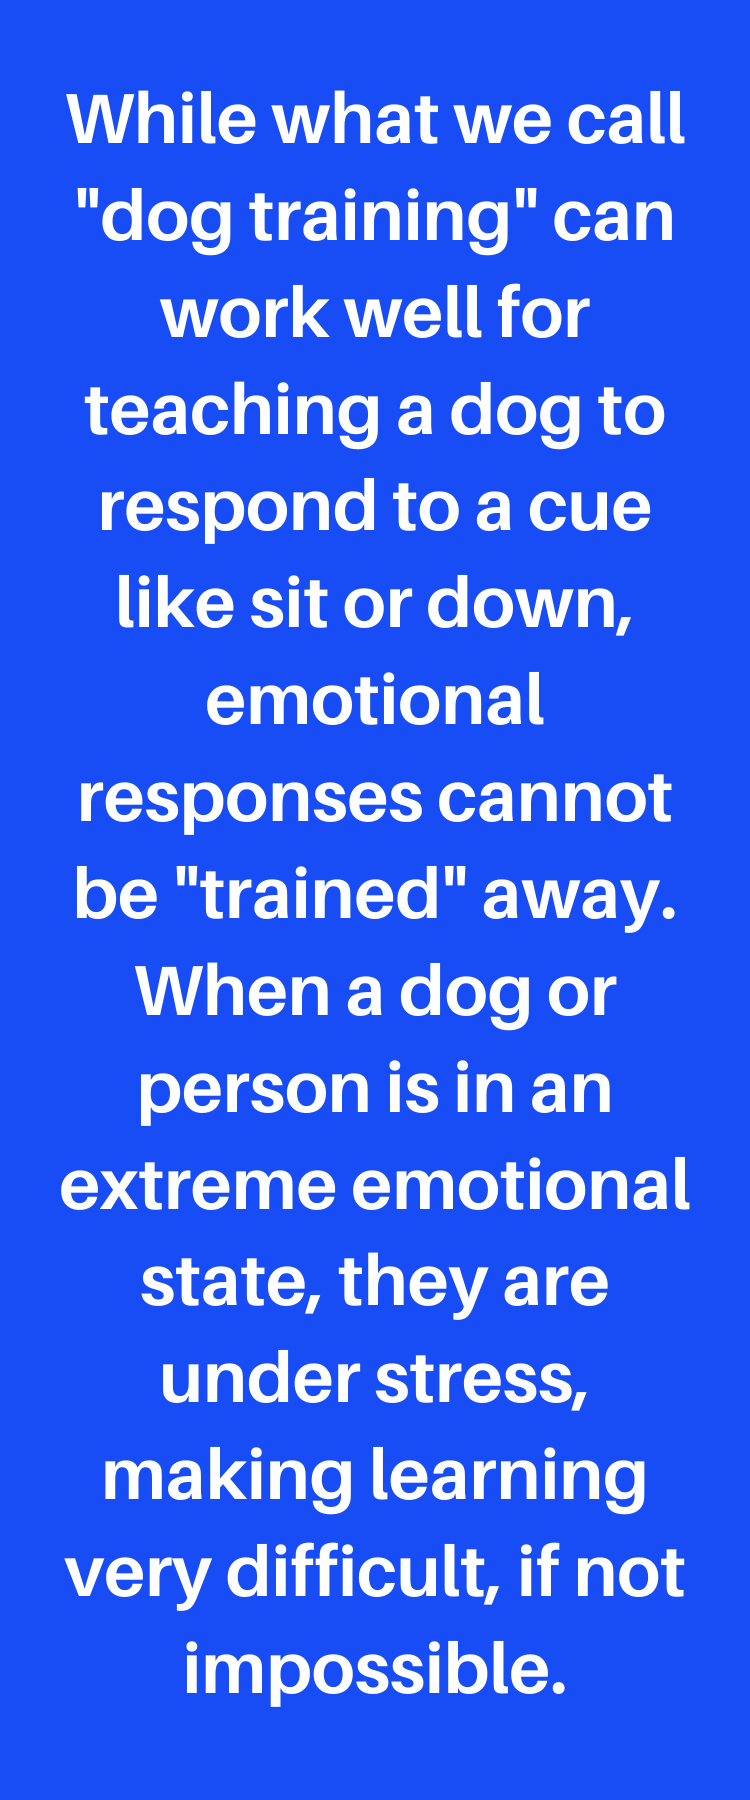 https://blog.greenacreskennel.com/wp-content/uploads/2022/05/While-what-we-call-dog-training-can-work-well-for-emotional-responses-cannot-be-trained-away-50-words.png